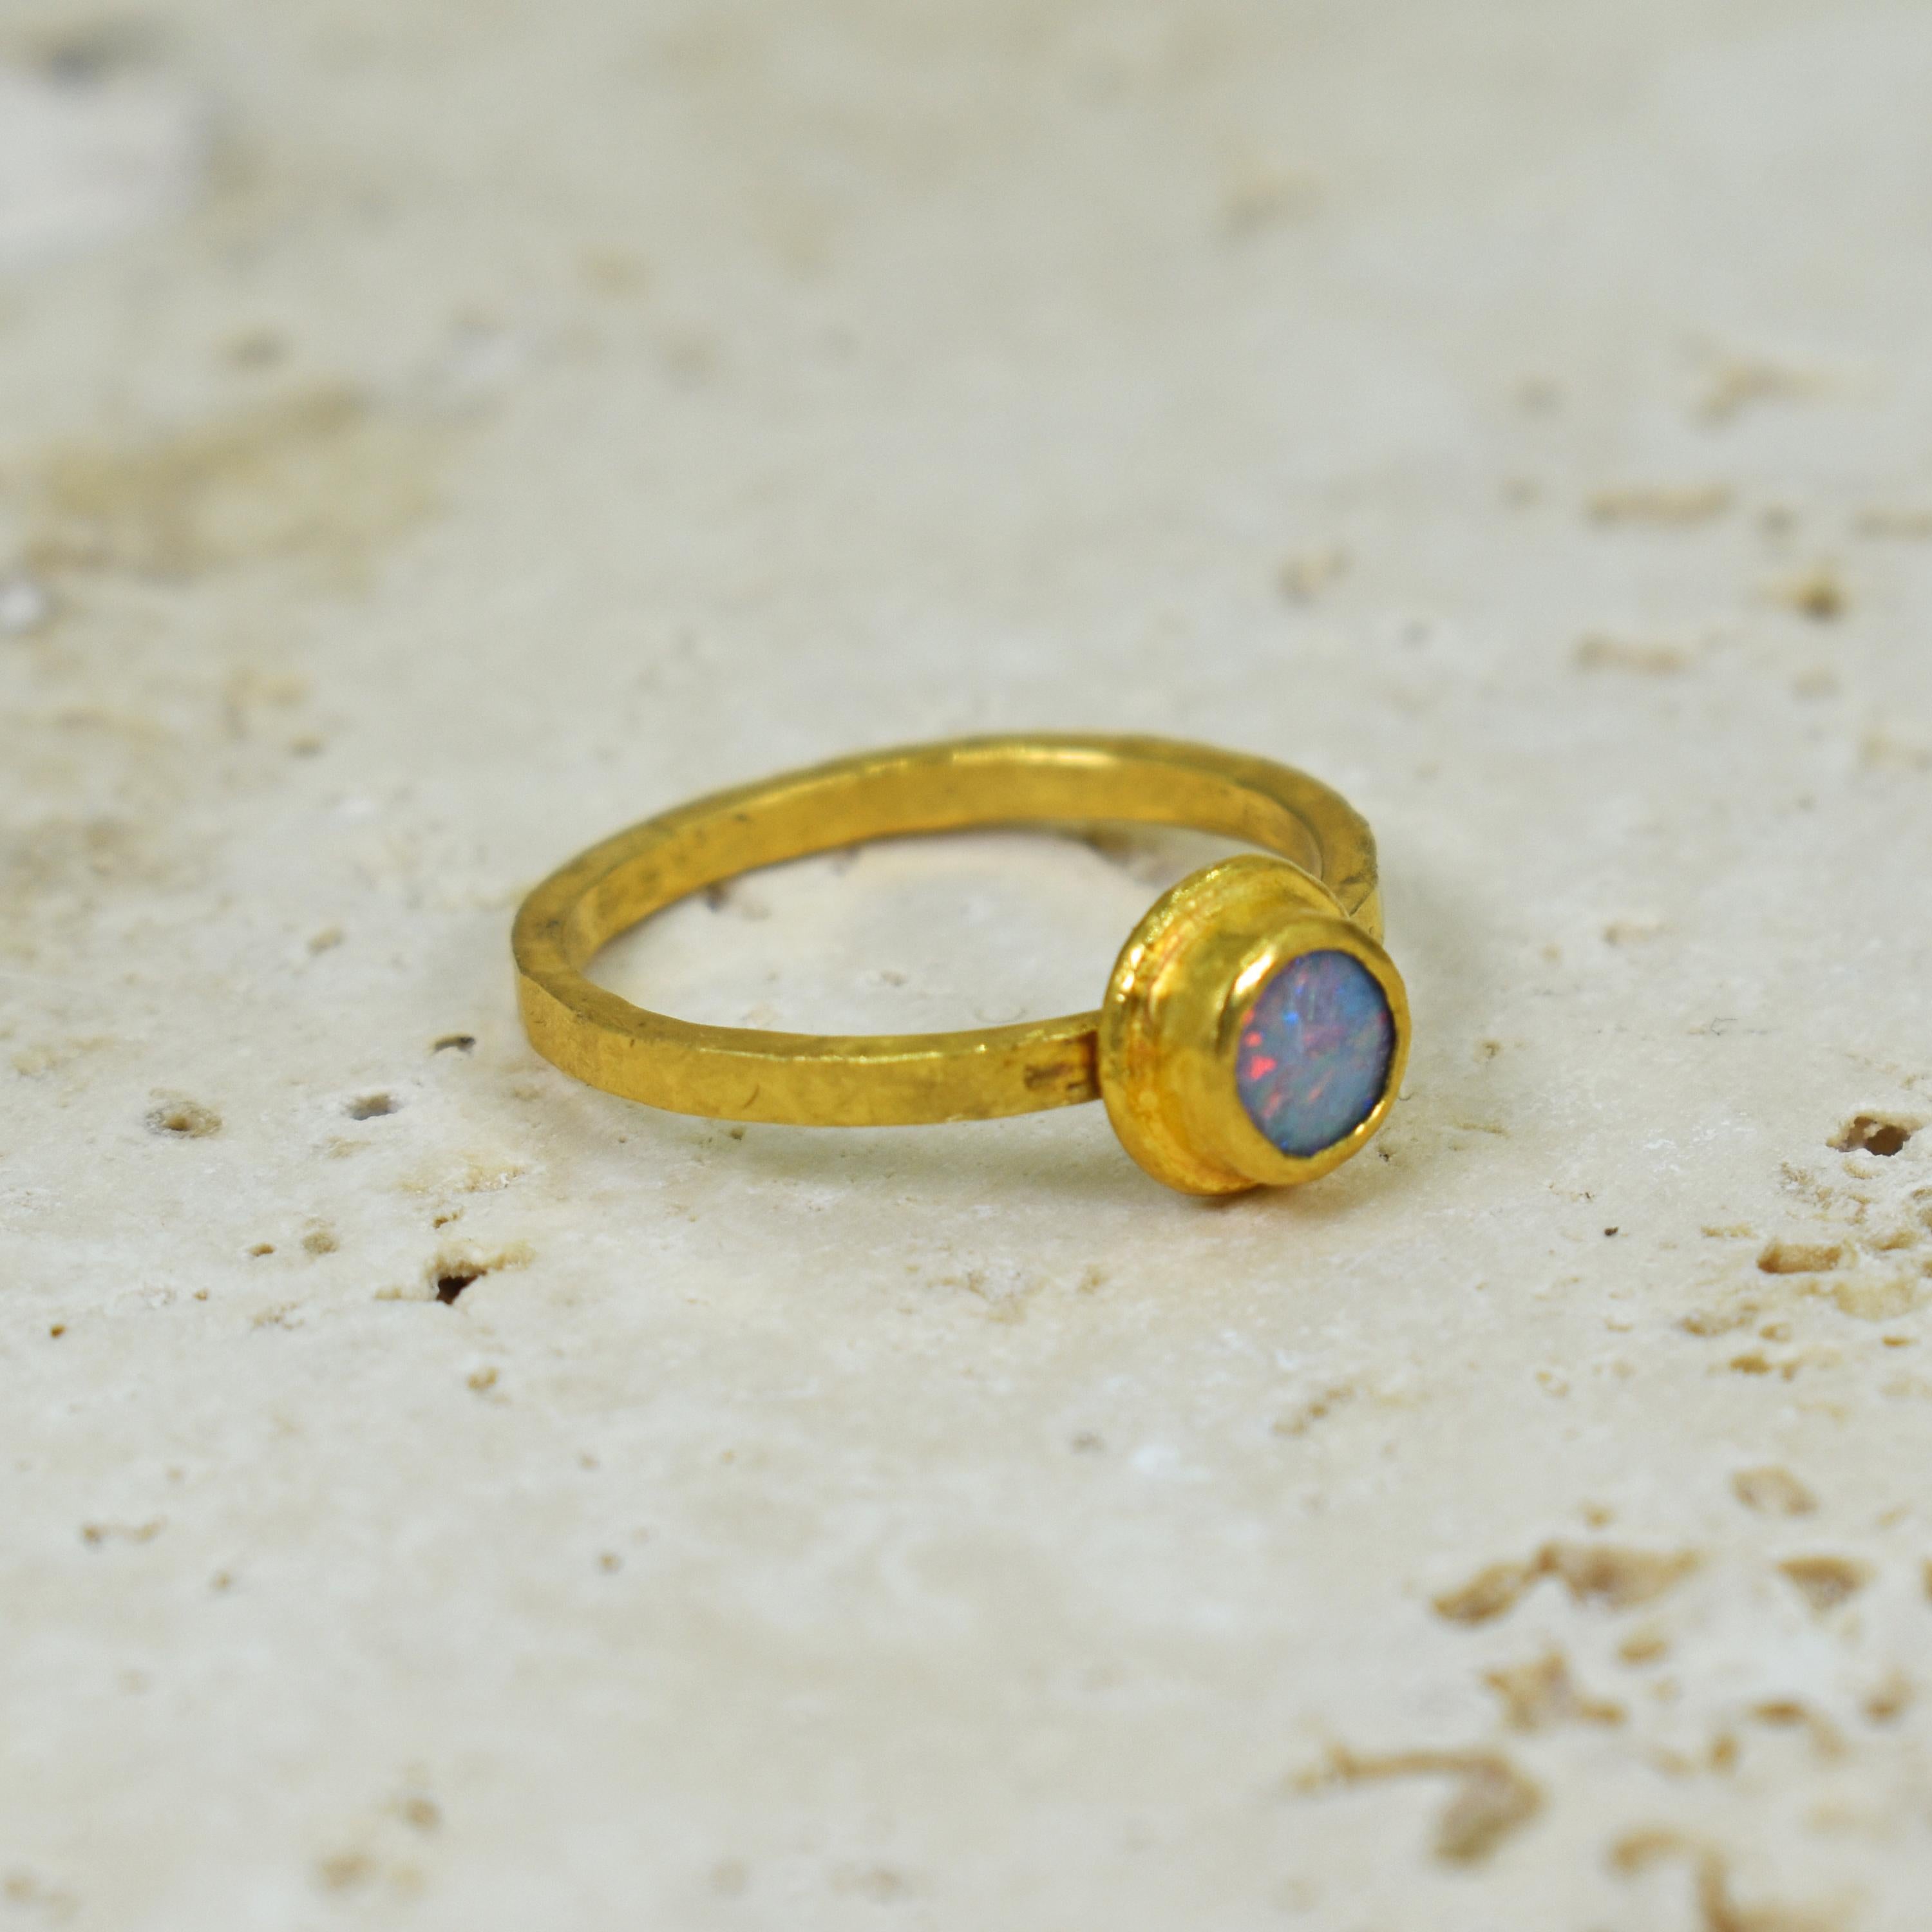 Lilac / Periwinkle Blue Opal and 22k yellow gold bezel stackable artisan ring. Opal ring is size US 6, and can be resized. Contemporary, yet rustic style, finished with a hammered, satin texture. This delicate, minimal ring with a gorgeous, colorful